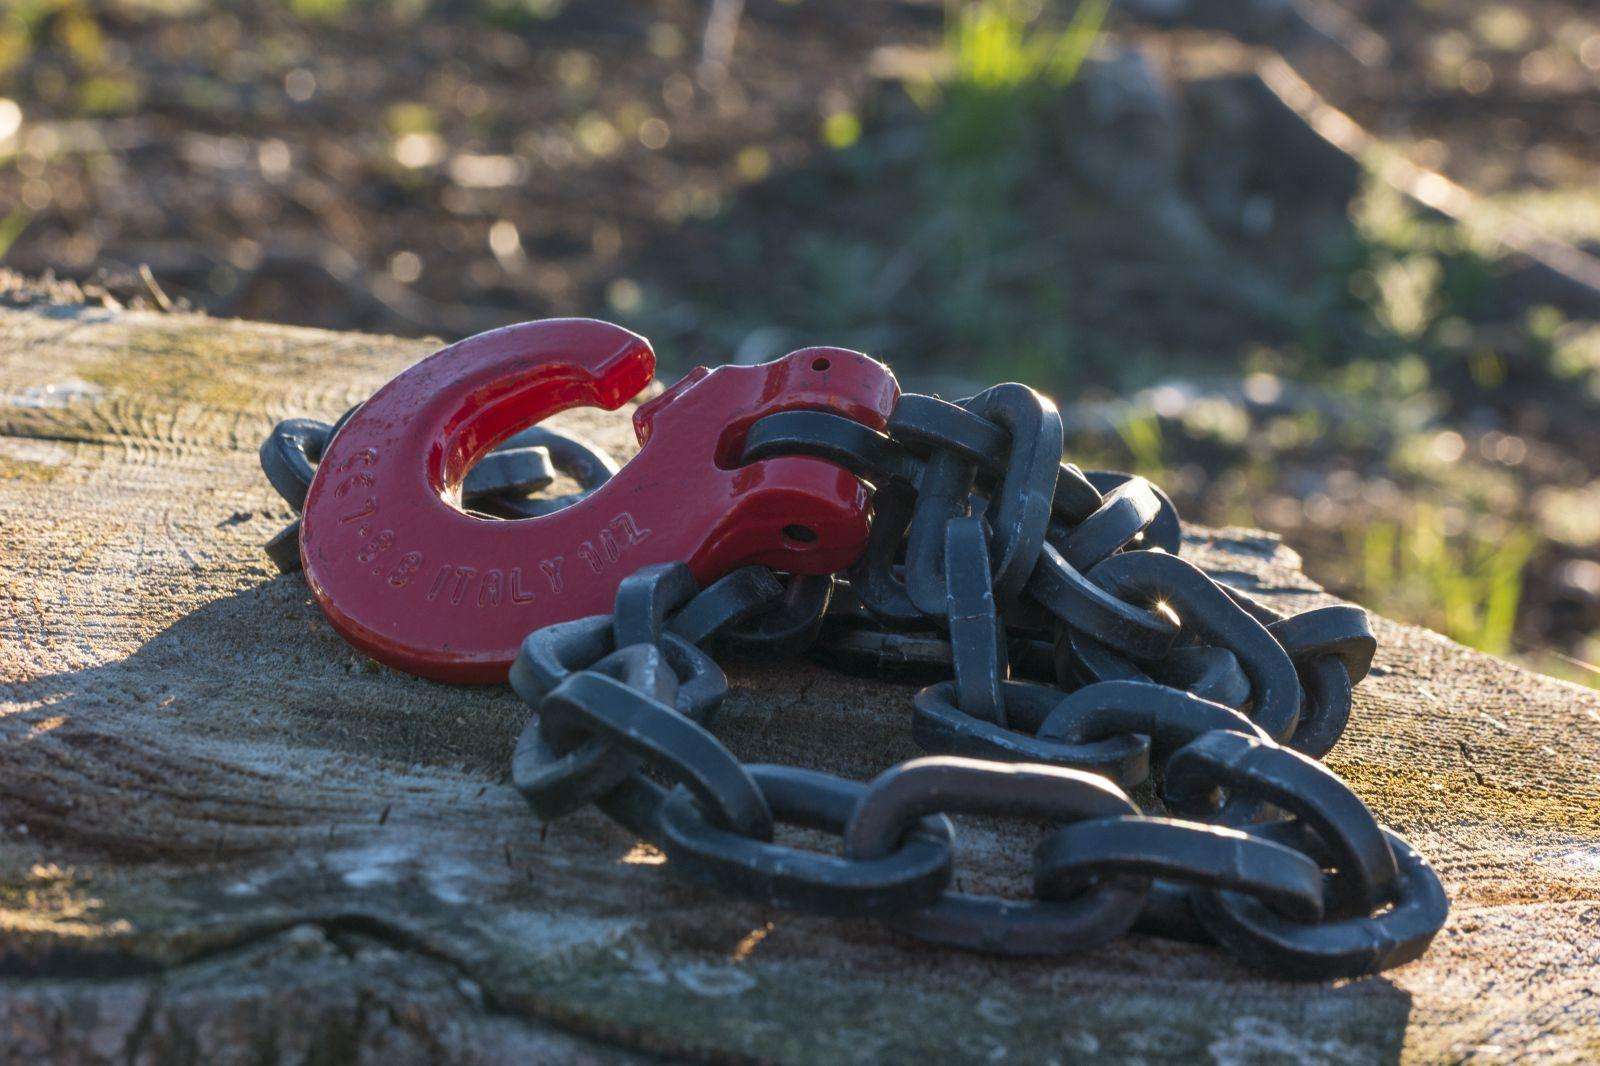 FORESTRY AND AGRICULTURAL CHAINS AND ACCESSORIES